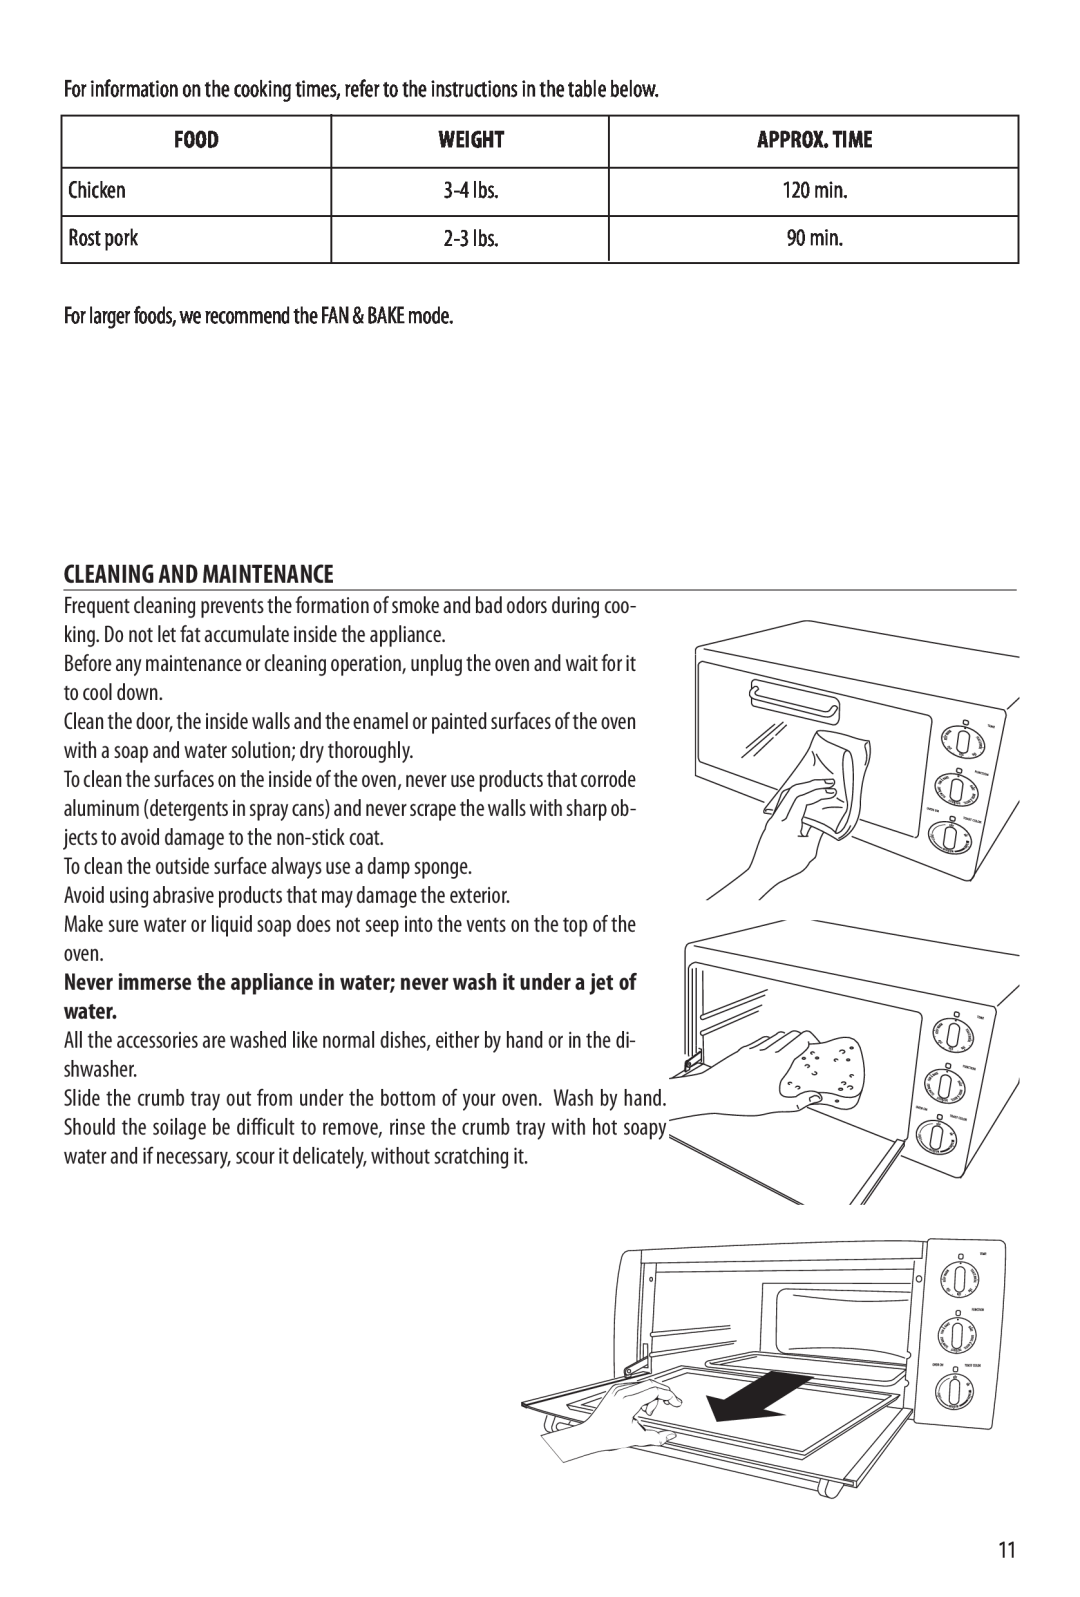 DeLonghi RO2058, RO2050, EO2060, EO2058 manual Cleaning And Maintenance, Food, Weight, Approx. Time 